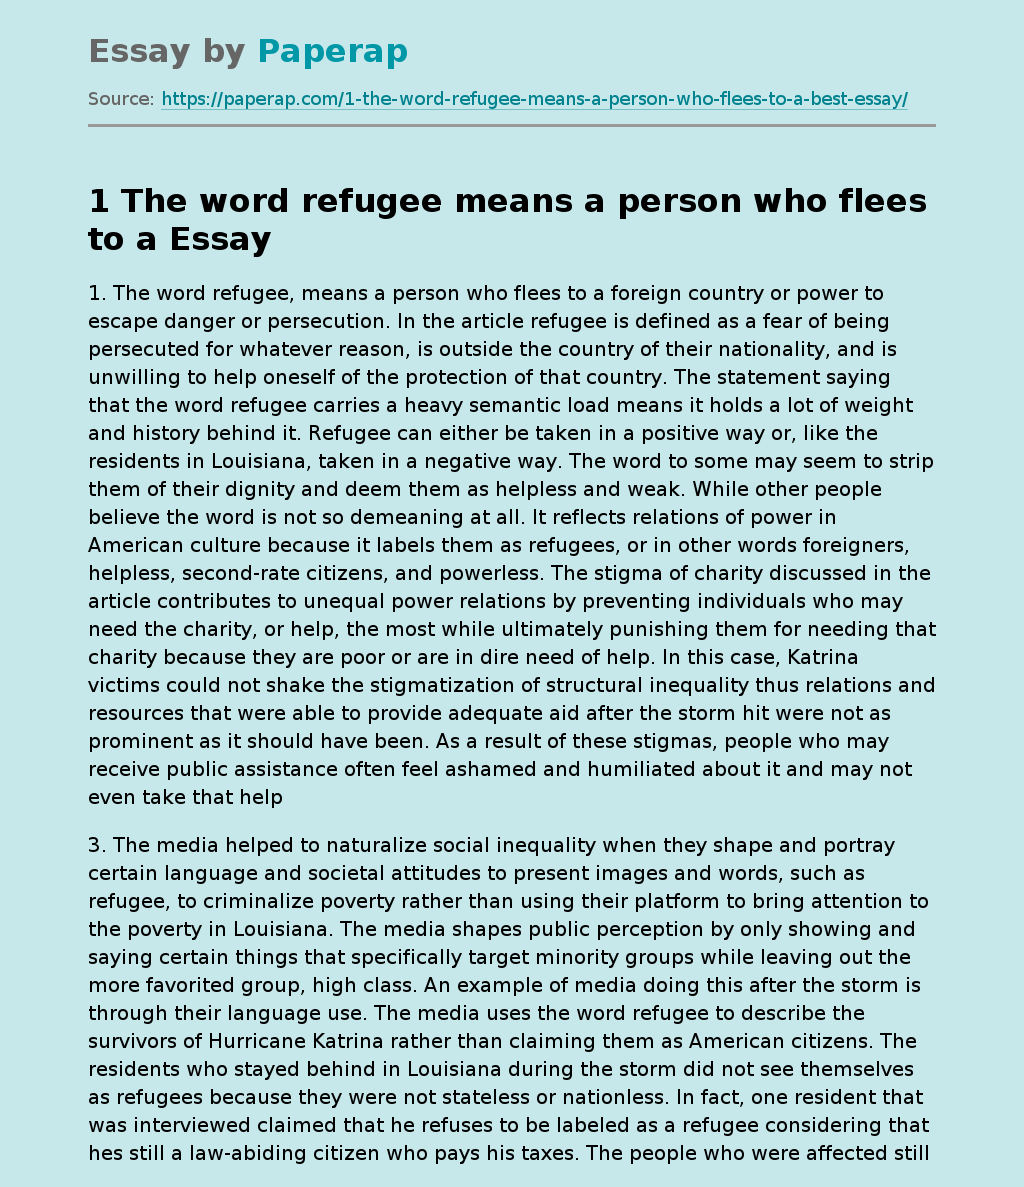 1 The word refugee means a person who flees to a